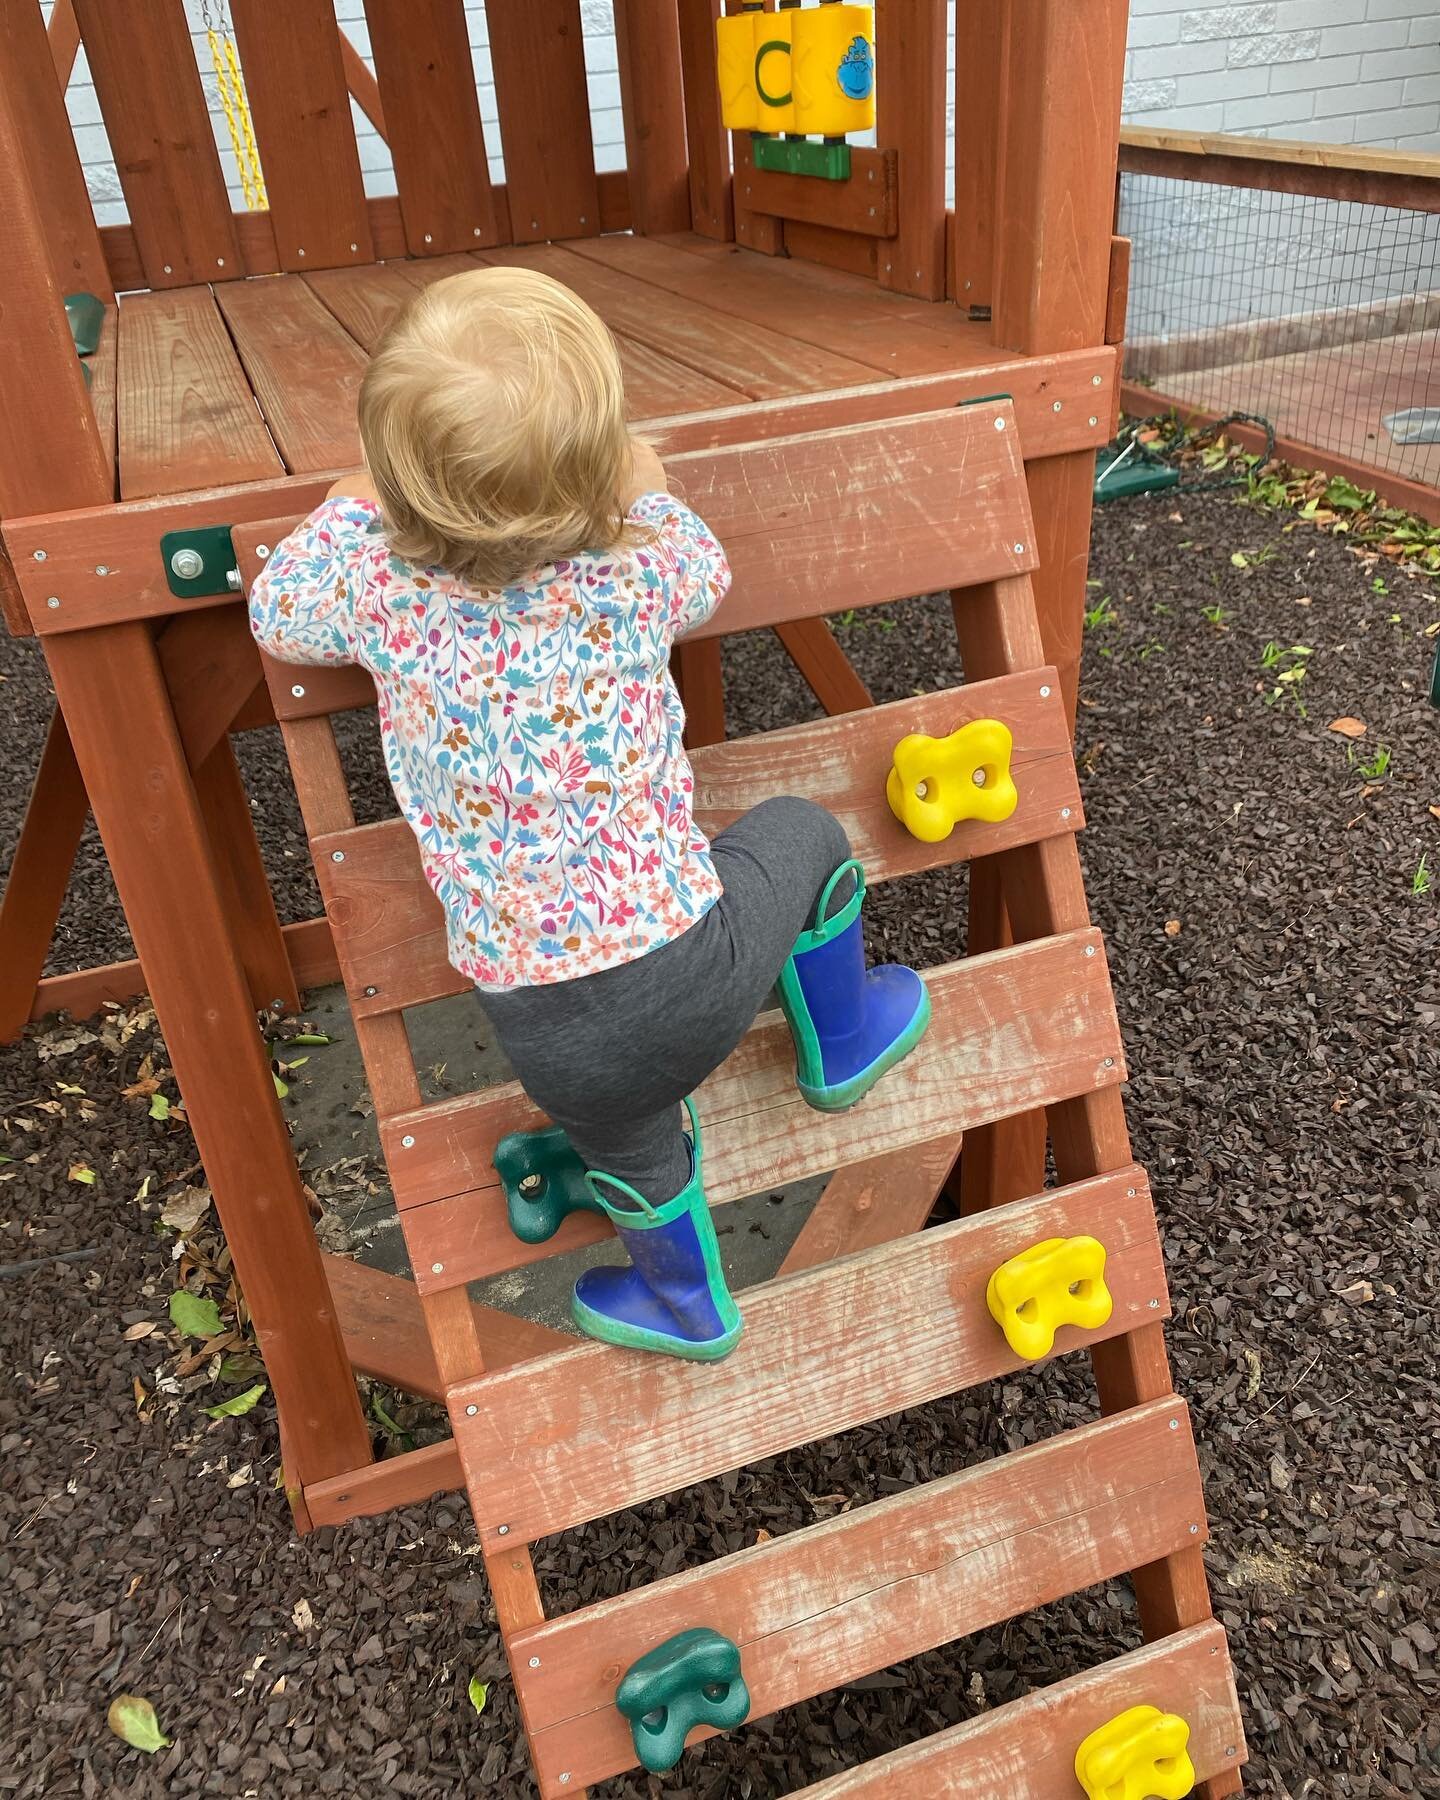 Fostering independence is such a challenge. As parents we want to be engaged and at the same time we don&rsquo;t want to hover. We never want our children to get hurt. The look of pride on this girls face after she was able to climb the ladder on her